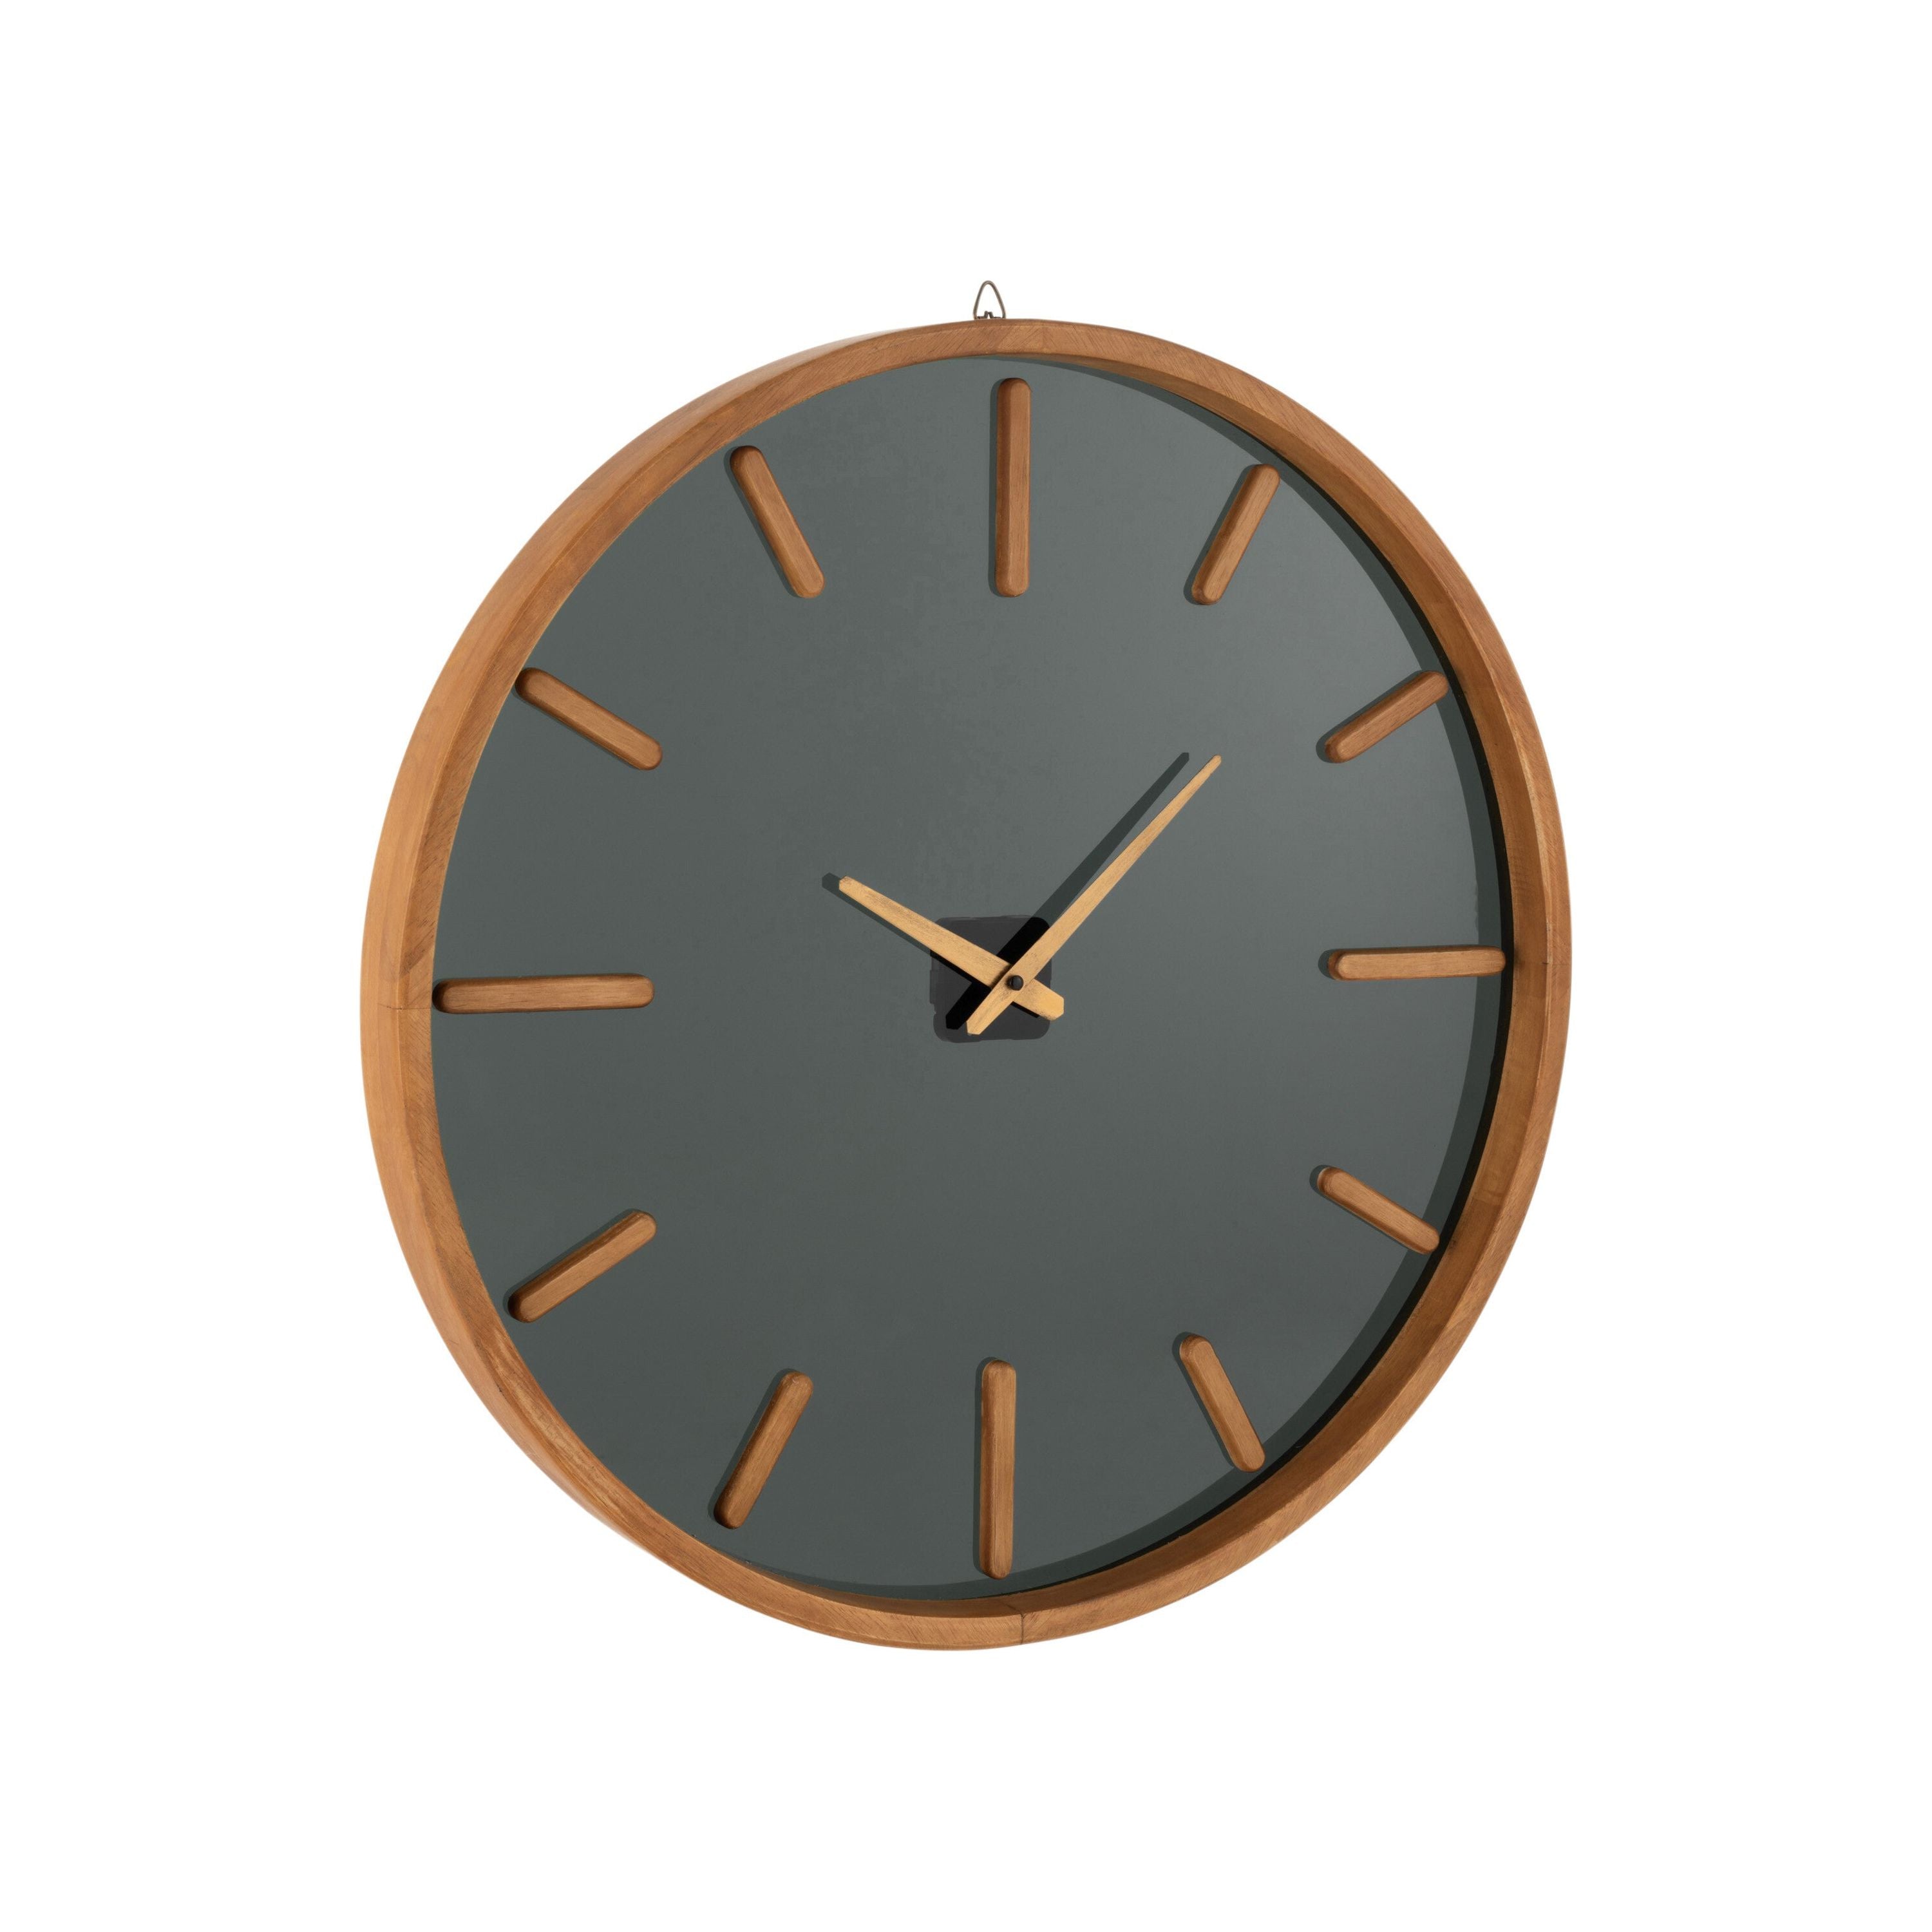 Wall clock Round Wood/glass Brown/black Large